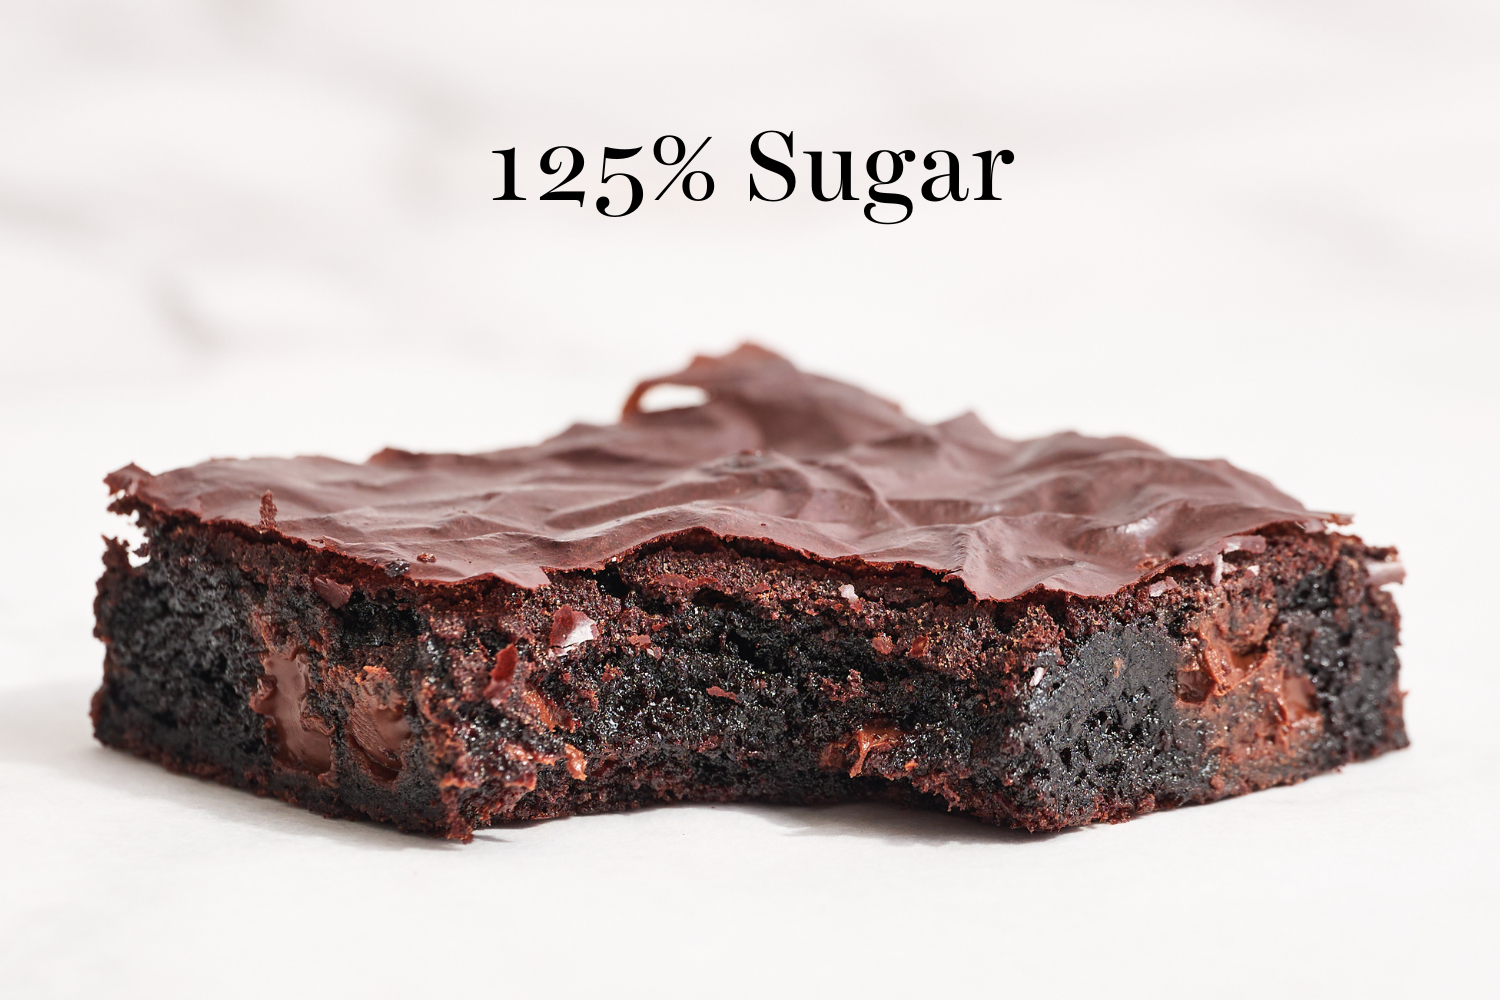 a slice of the 125% sugar brownies with a bite taken out.